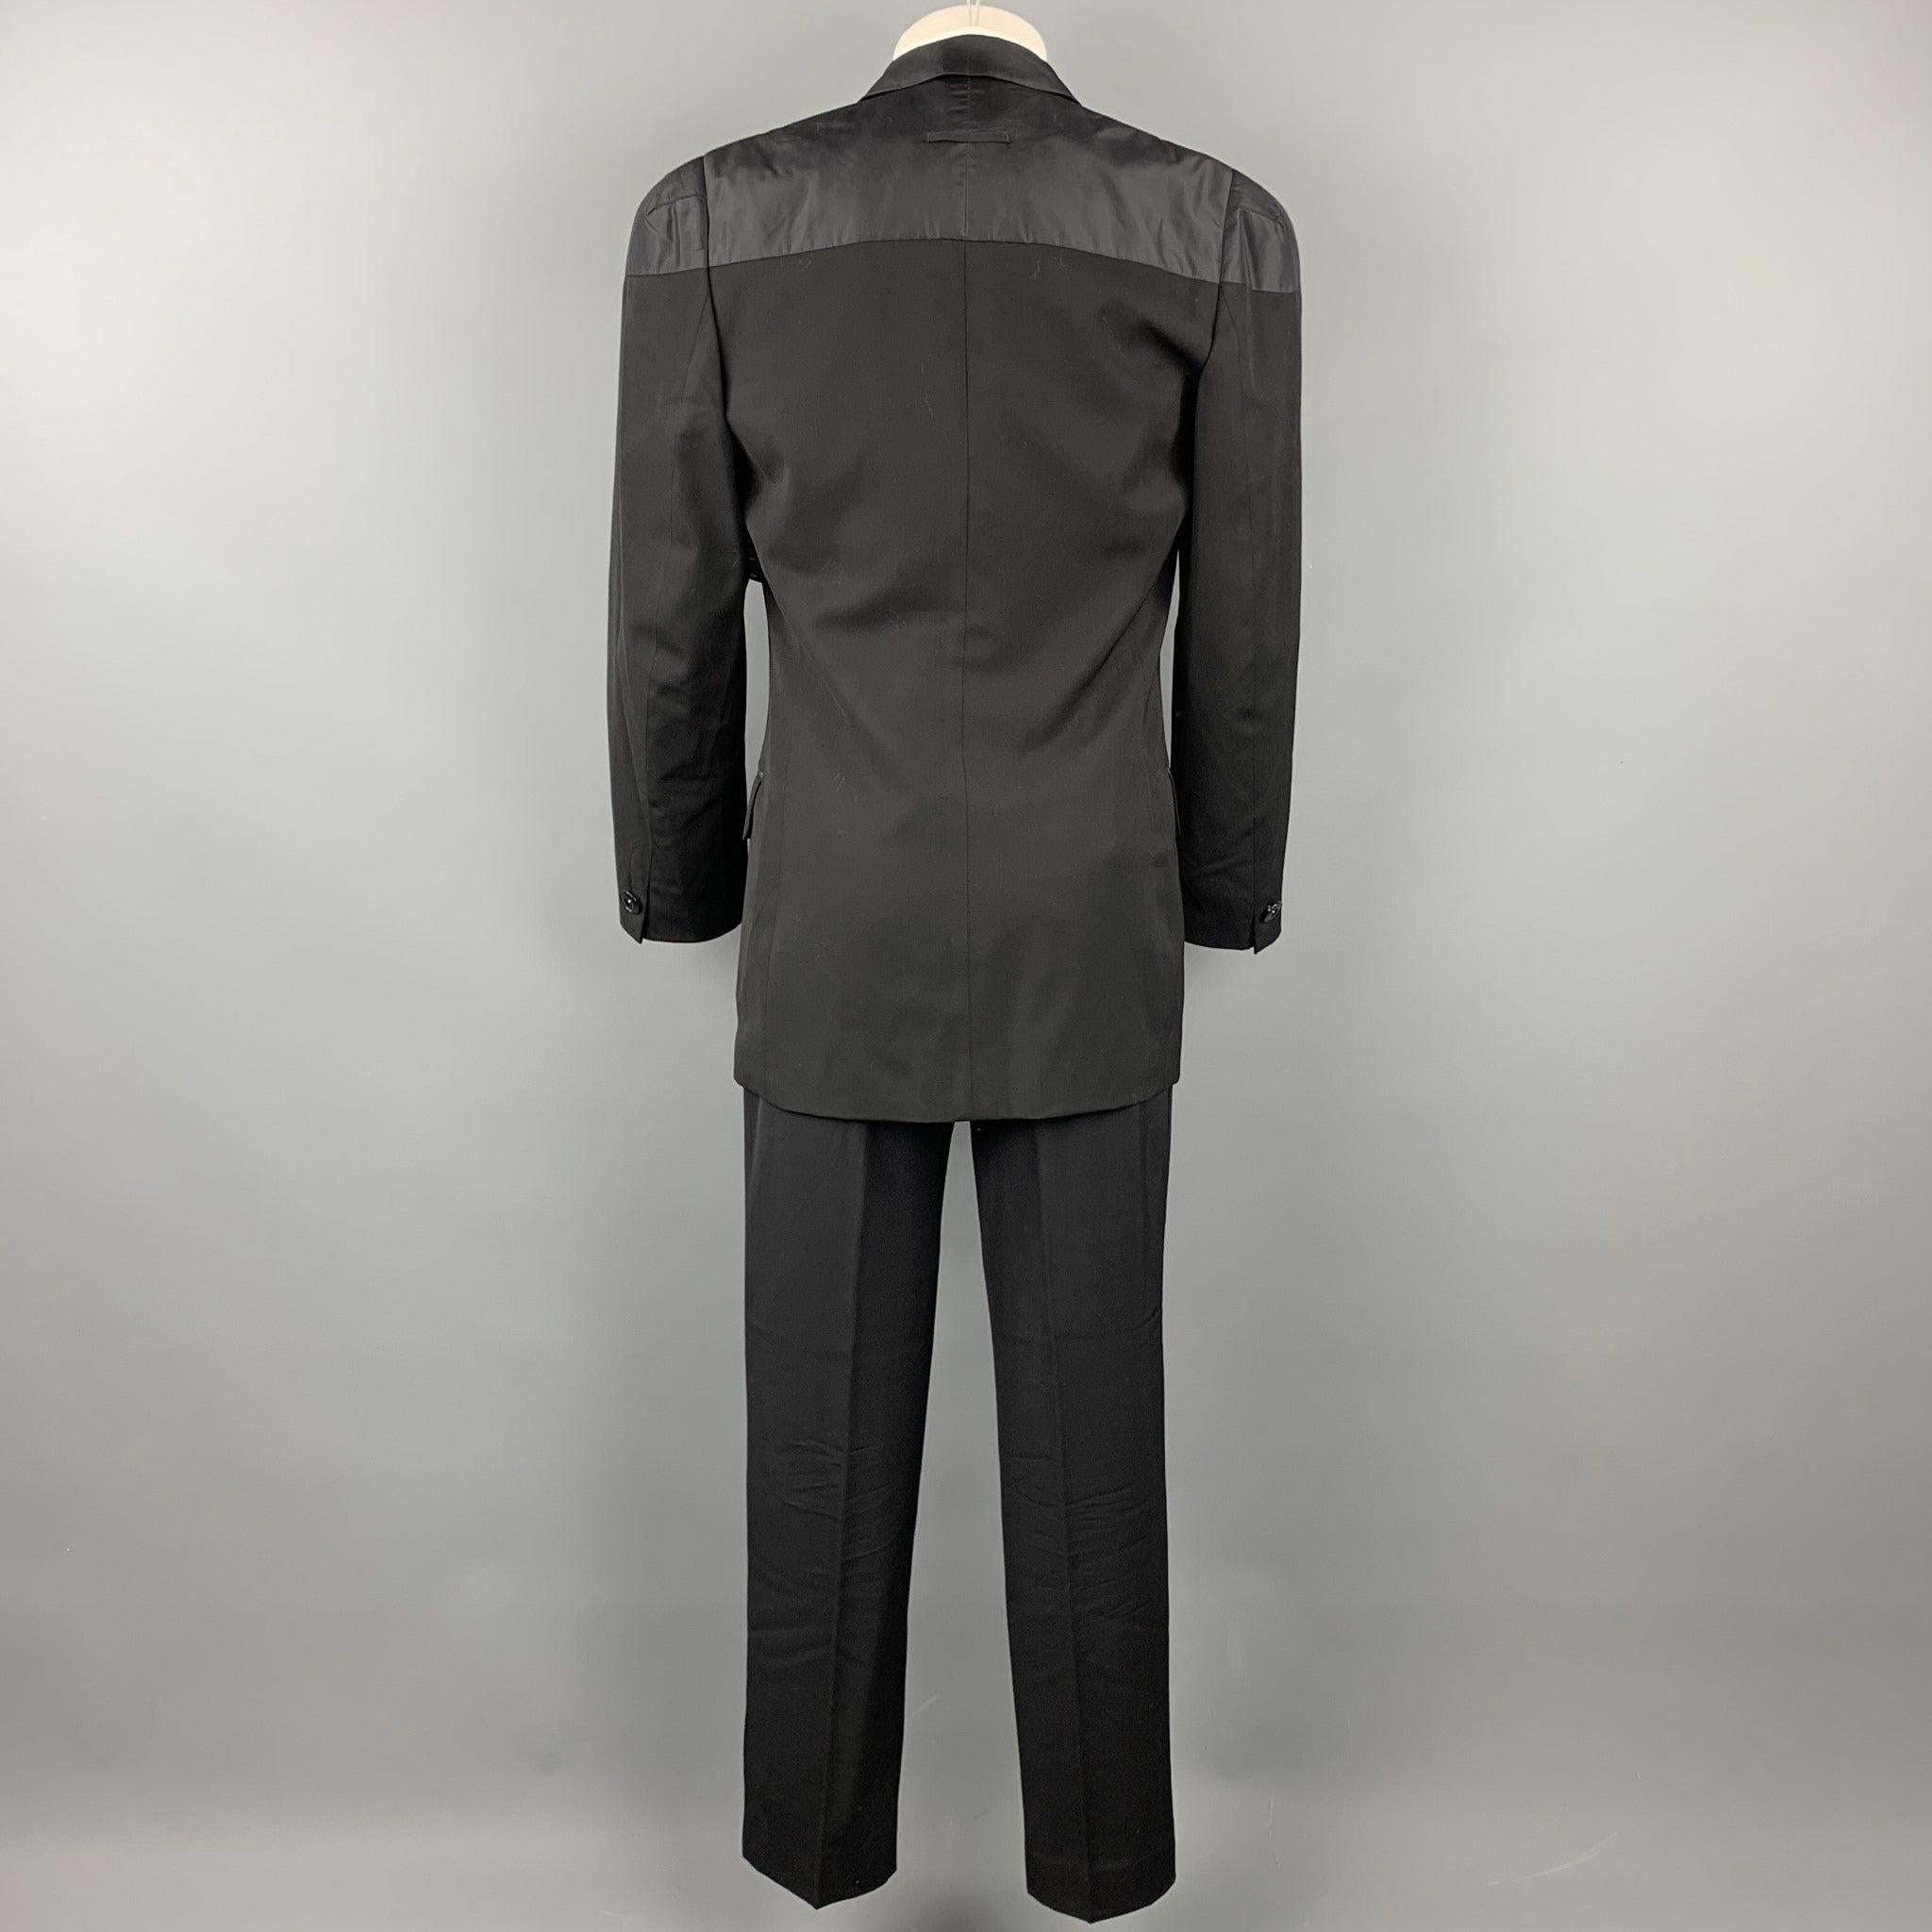 JEAN PAUL GAULTIER CLASSIQUE Size 38 Black Wool Peak Lapel Double Breasted Suit In Good Condition For Sale In San Francisco, CA